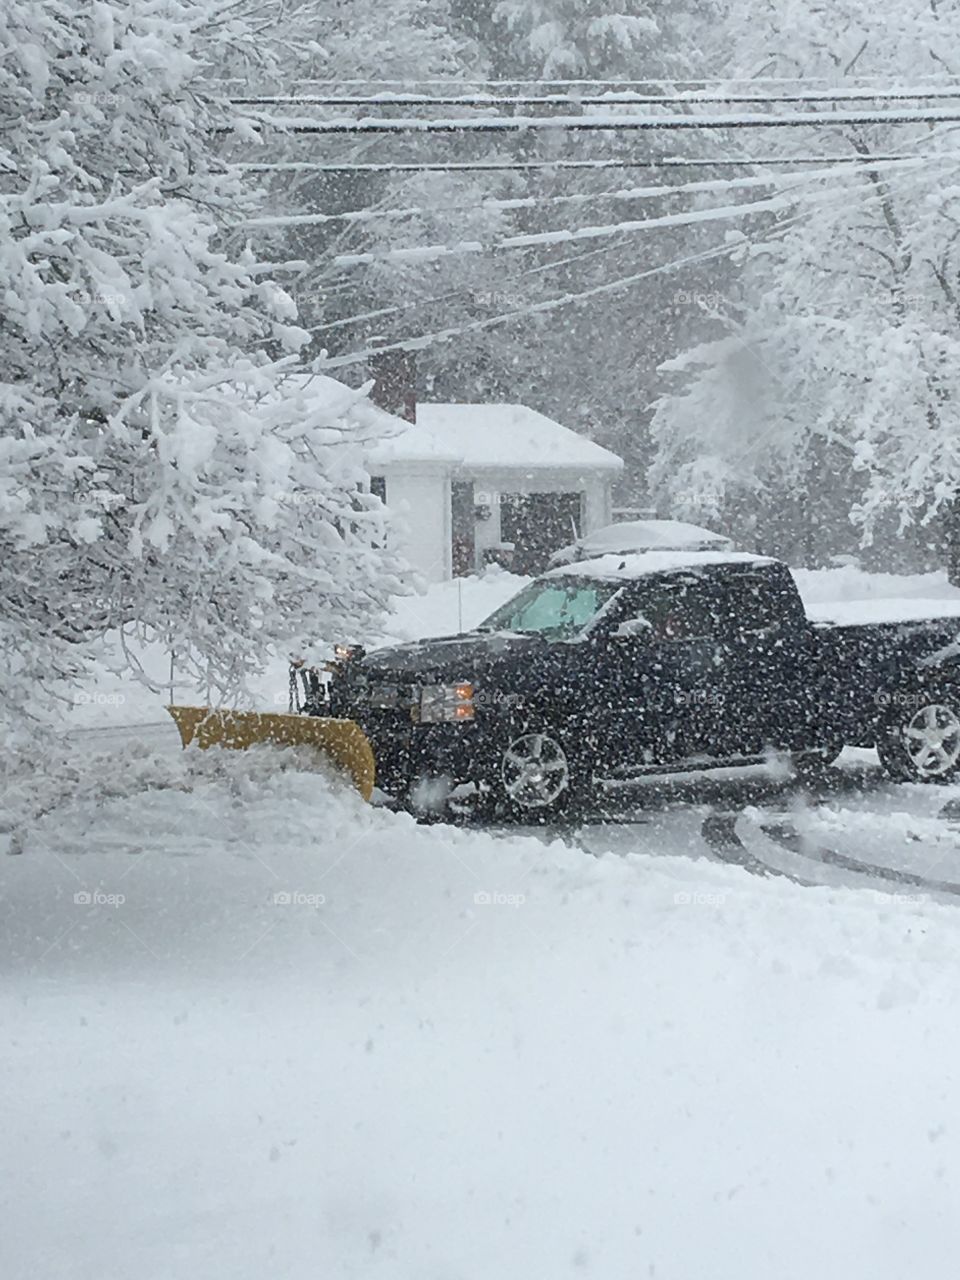 Plowing During Snowstorm New England
